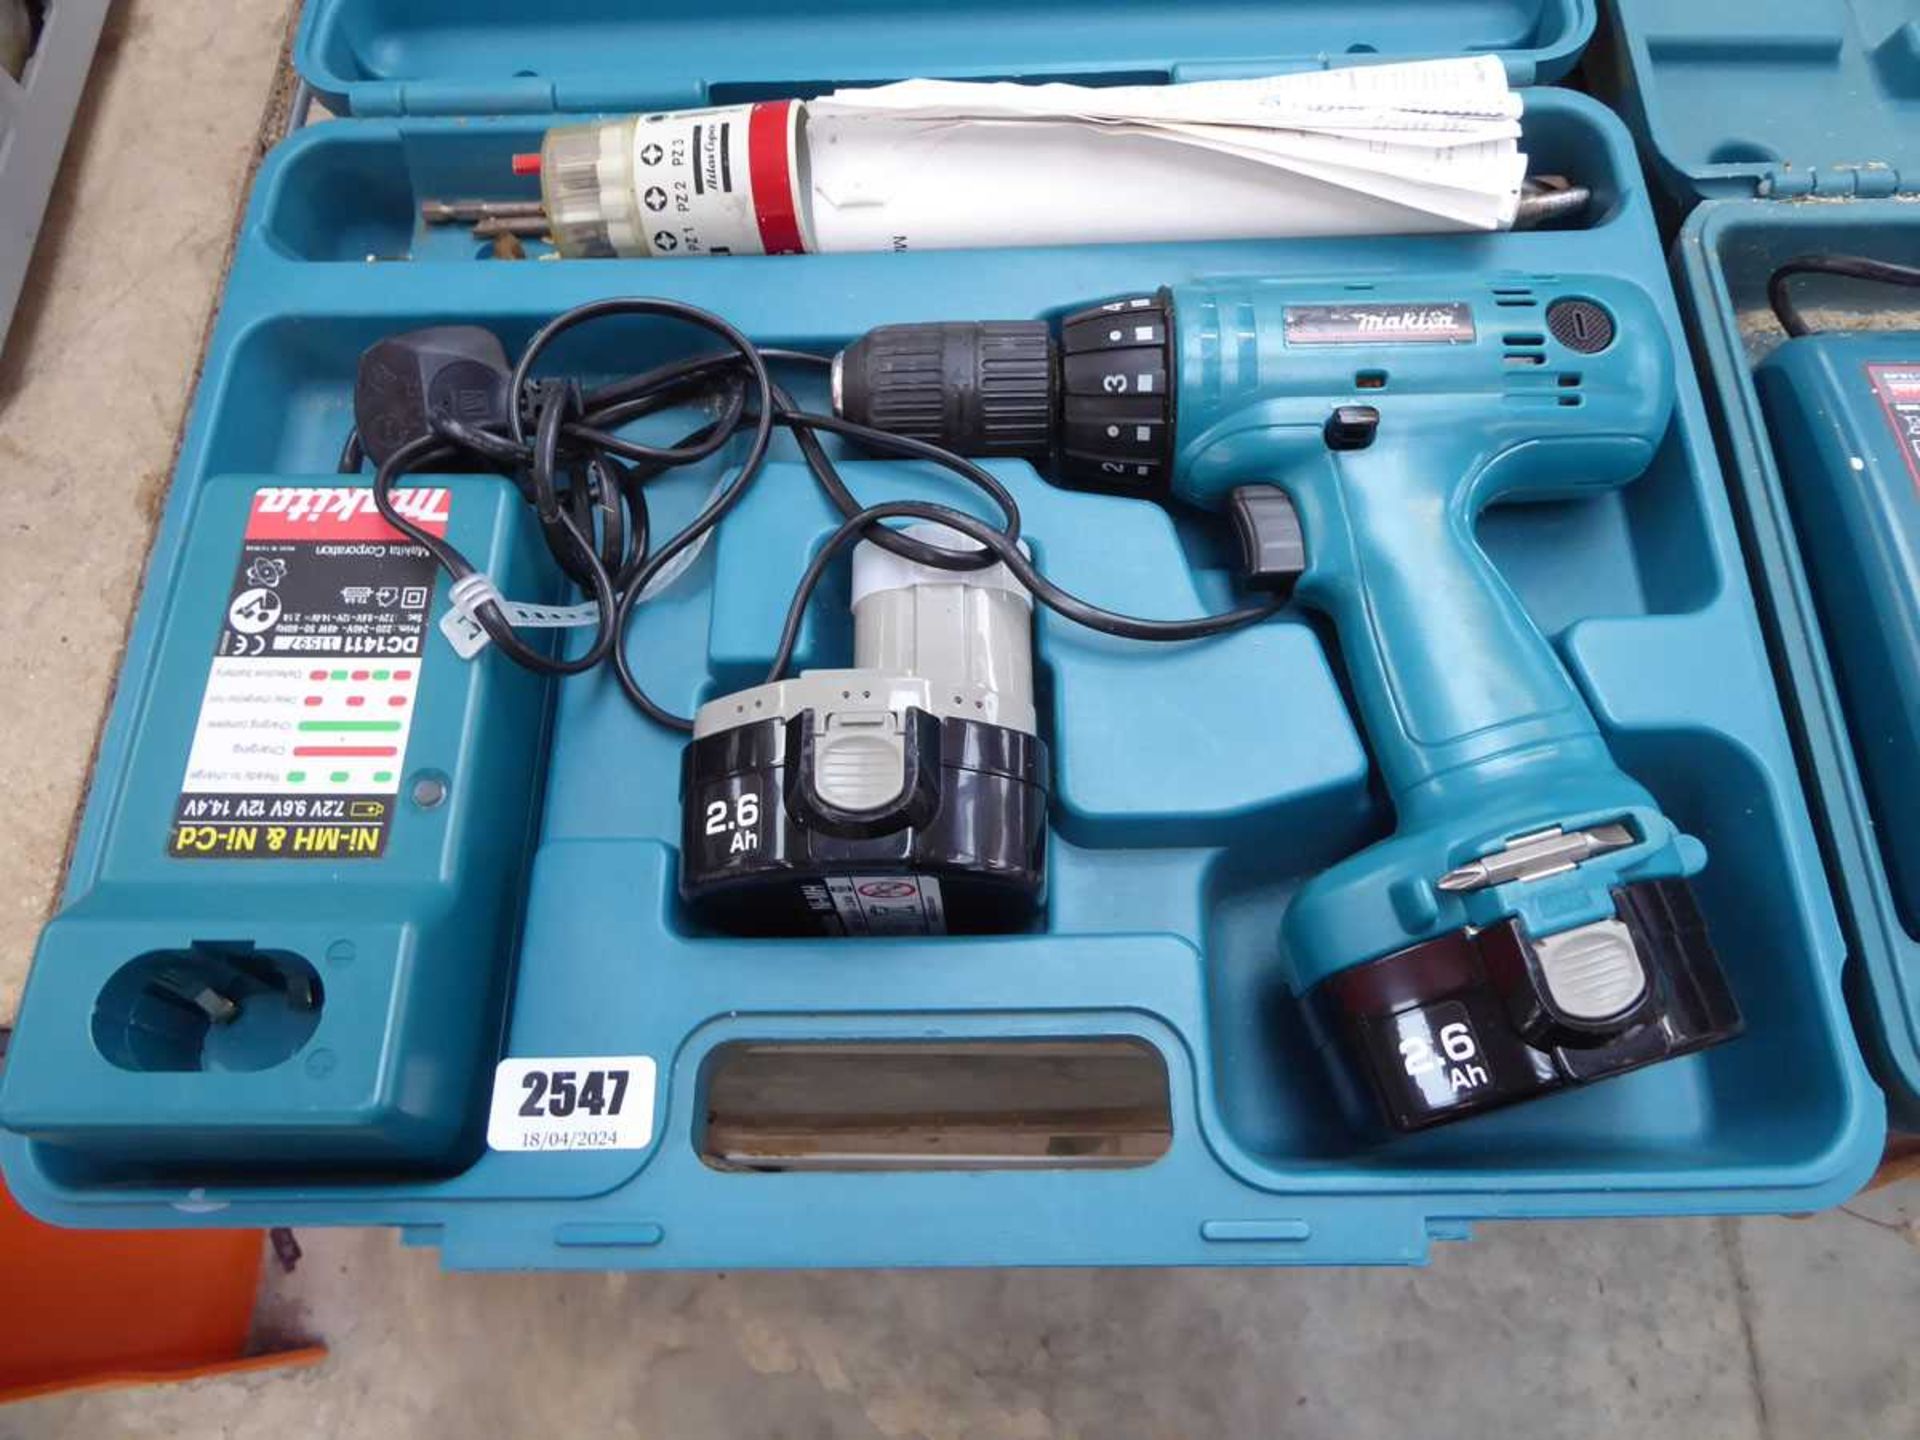 2 cased Makita cordless drills with 2 batteries and charger - Image 2 of 3